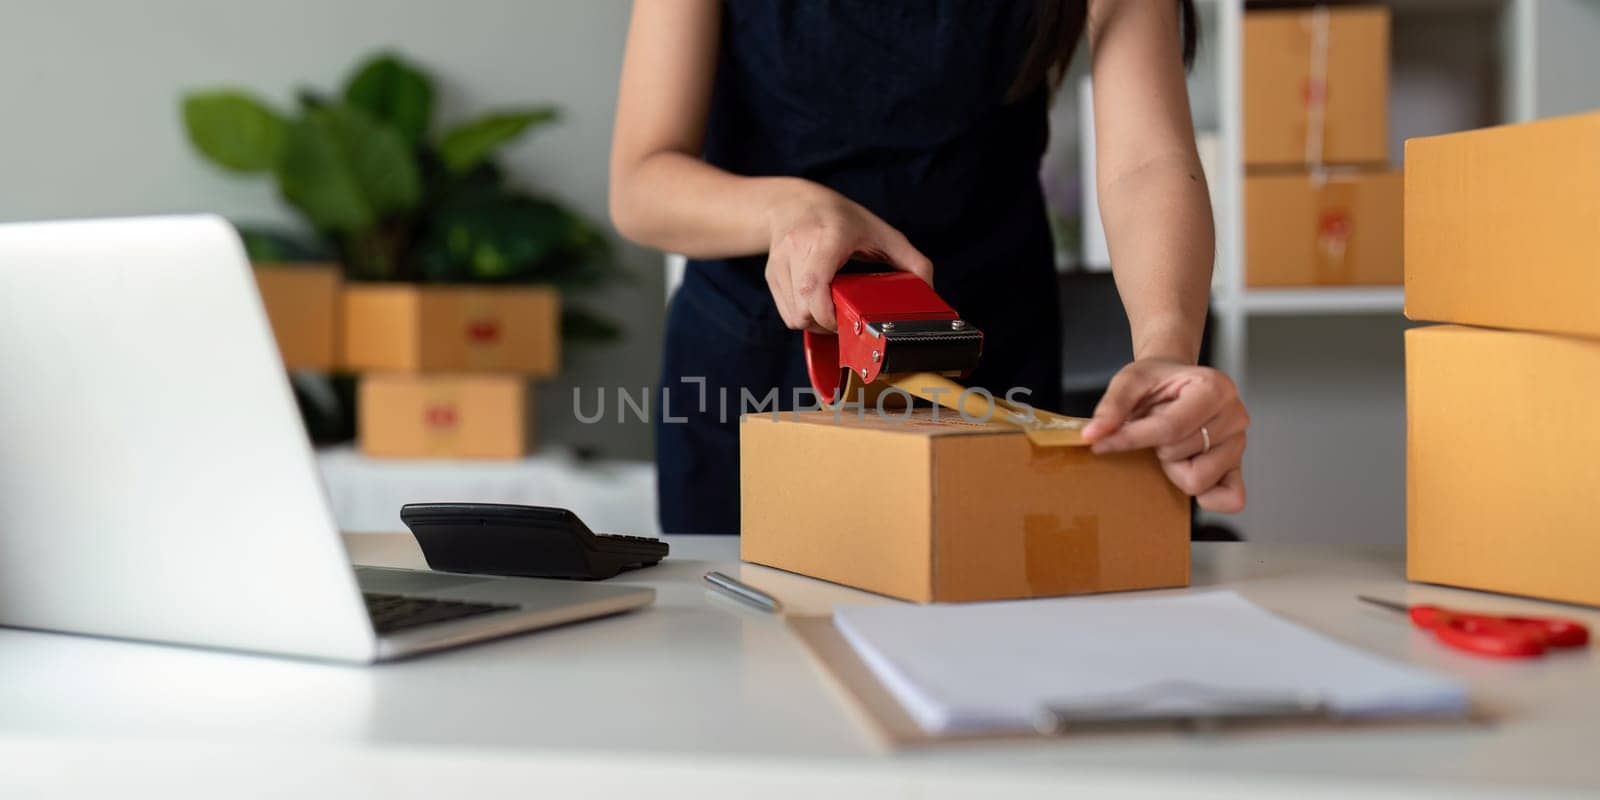 Woman use scotch tape to attach parcel boxes to prepare goods for the process of packaging at home, shipping, online sale internet marketing ecommerce concept startup business idea by nateemee